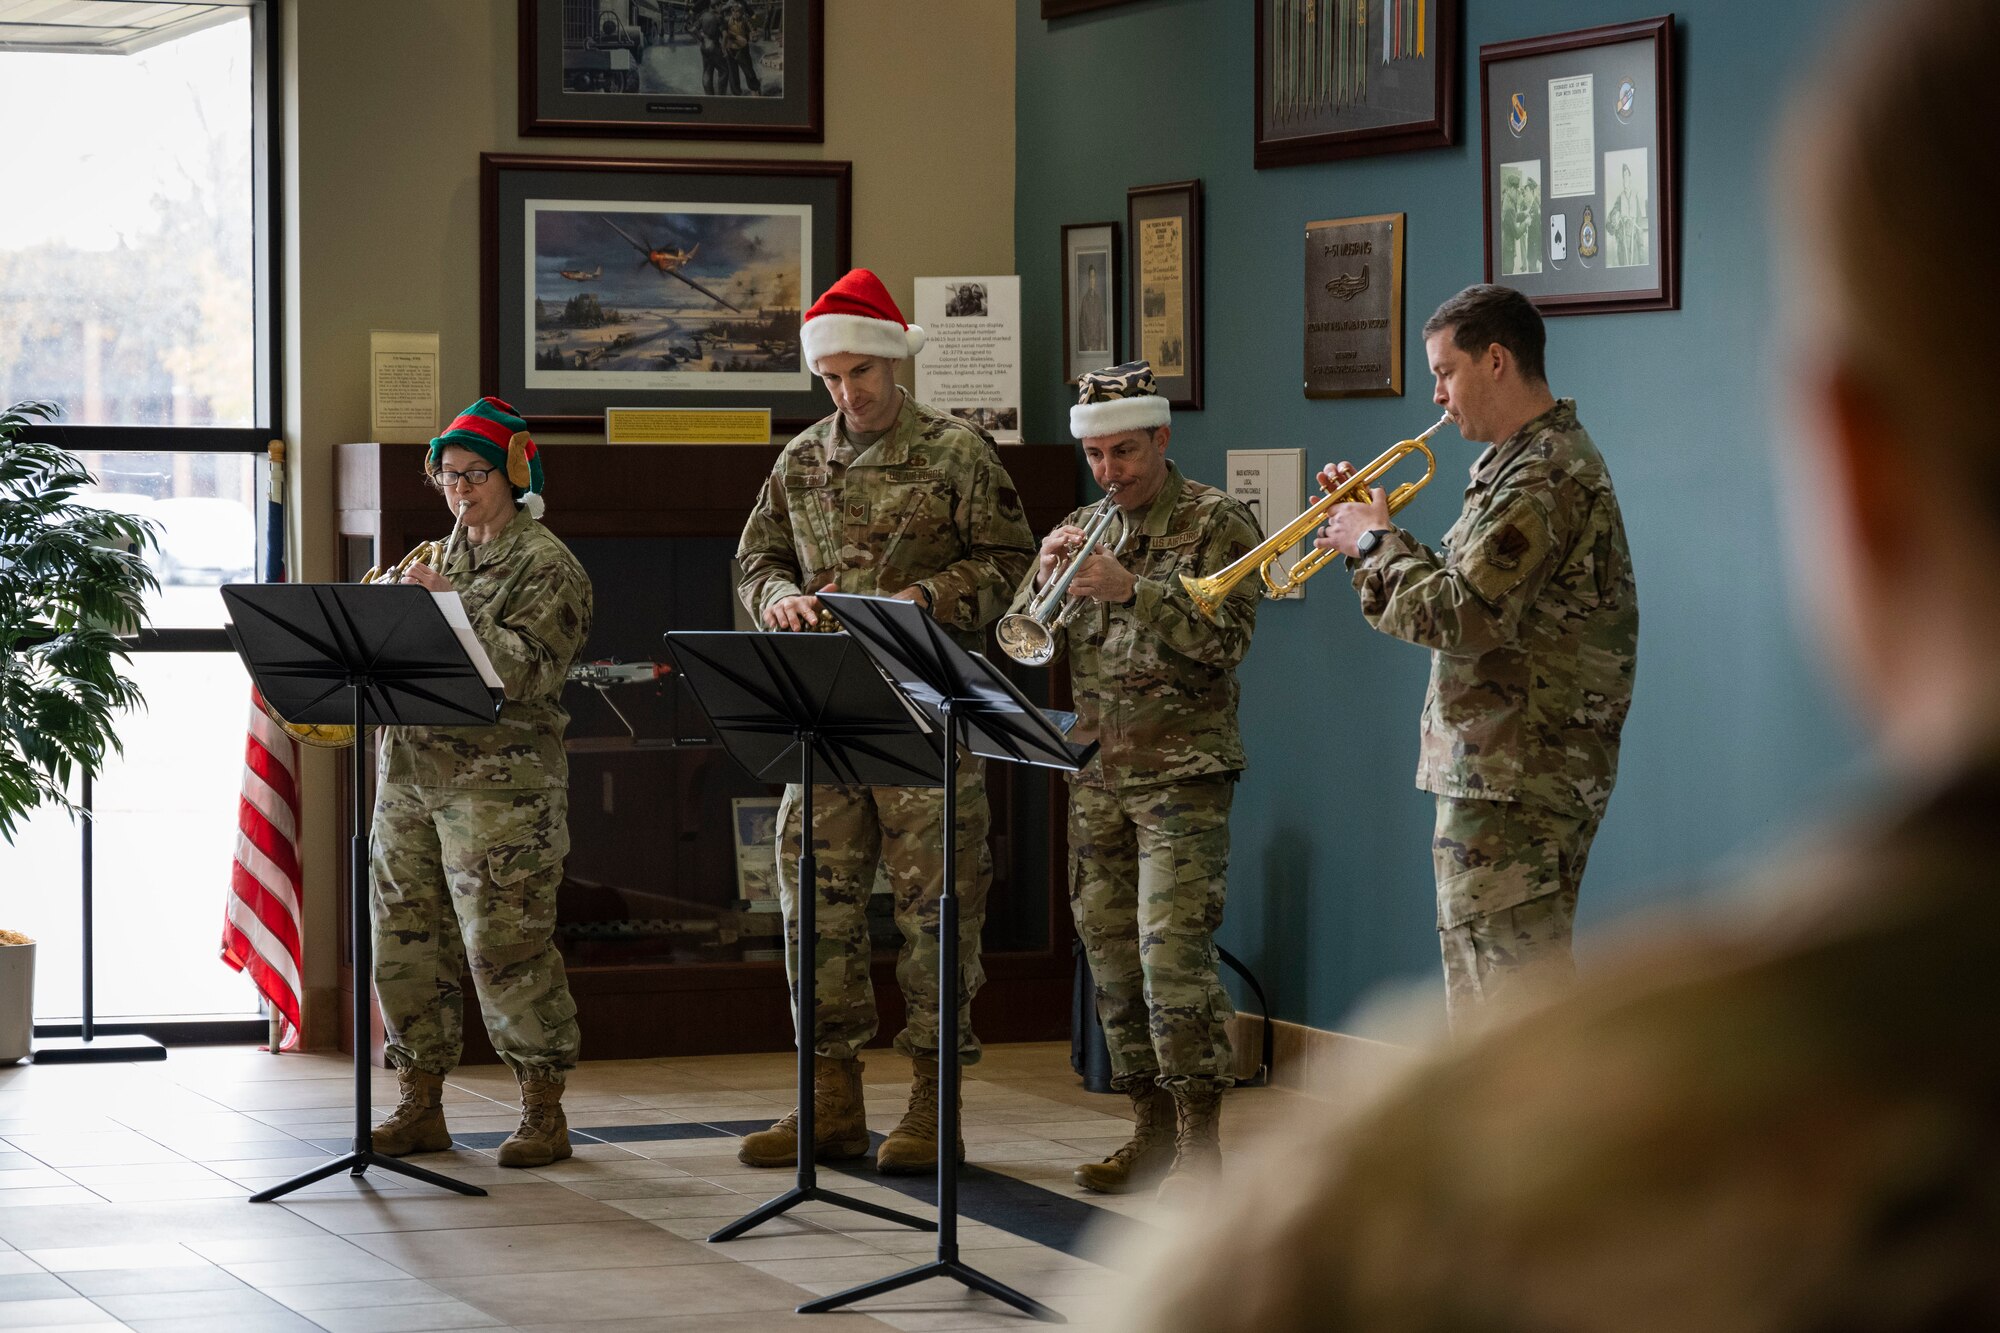 Members of the U.S. Air Force Heritage of America band brass quartet perform at Seymour Johnson Air Force Base, North Carolina, Dec. 14, 2022. Through the universal language of music, the band communicates U.S. Air Force and Department of Defense messages, making lasting connections with their audiences.